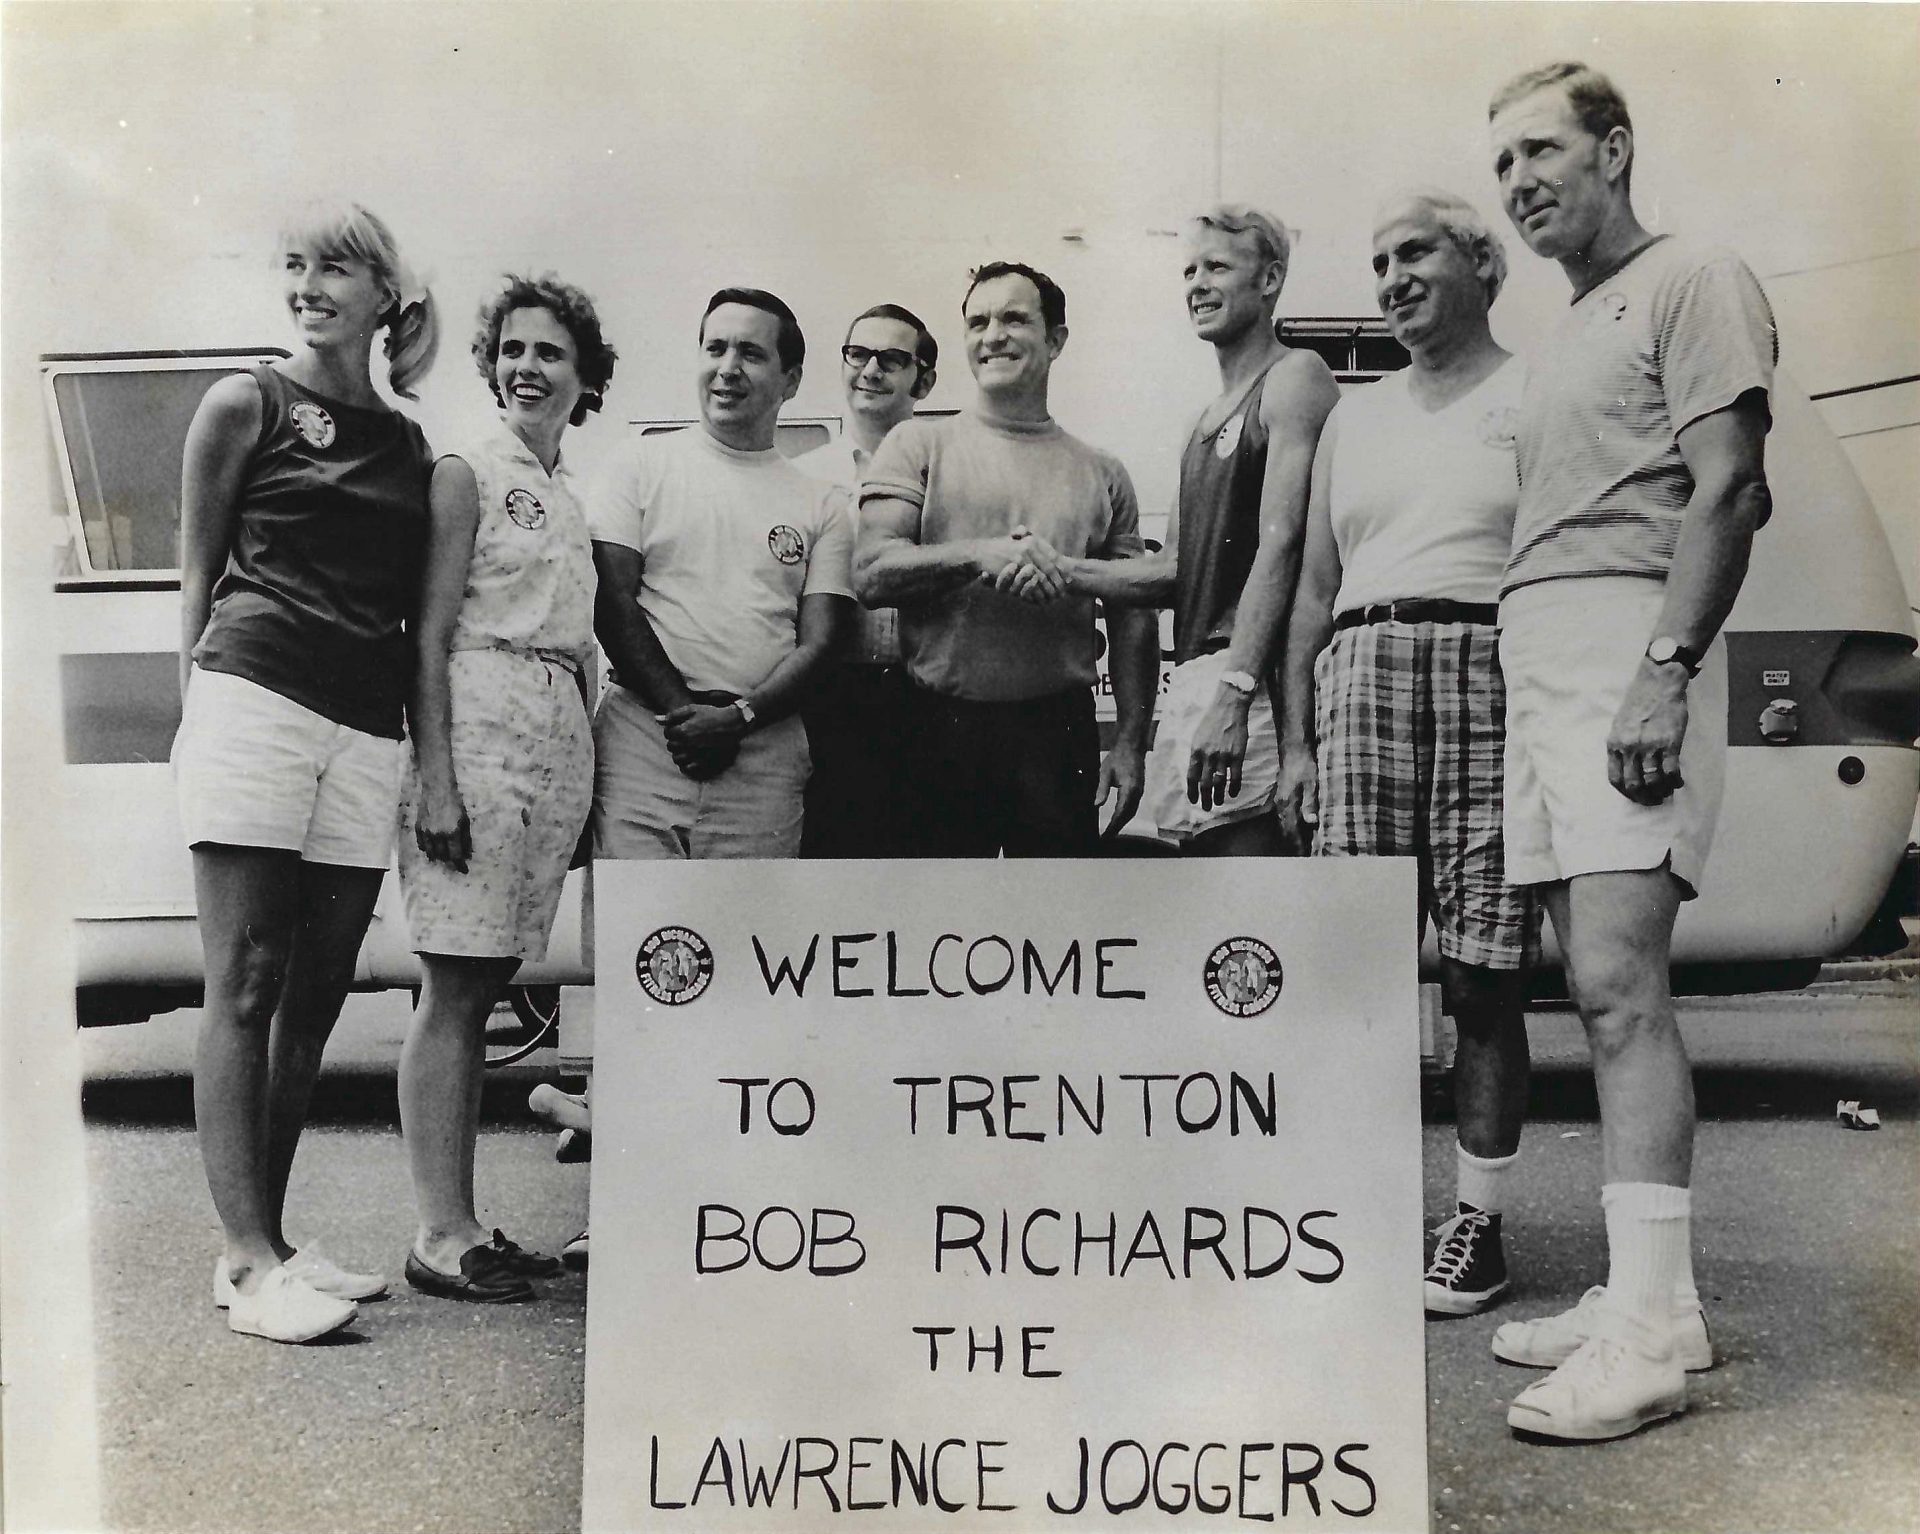 Jimmy with Lawrence Joggers and Bill Schroeder